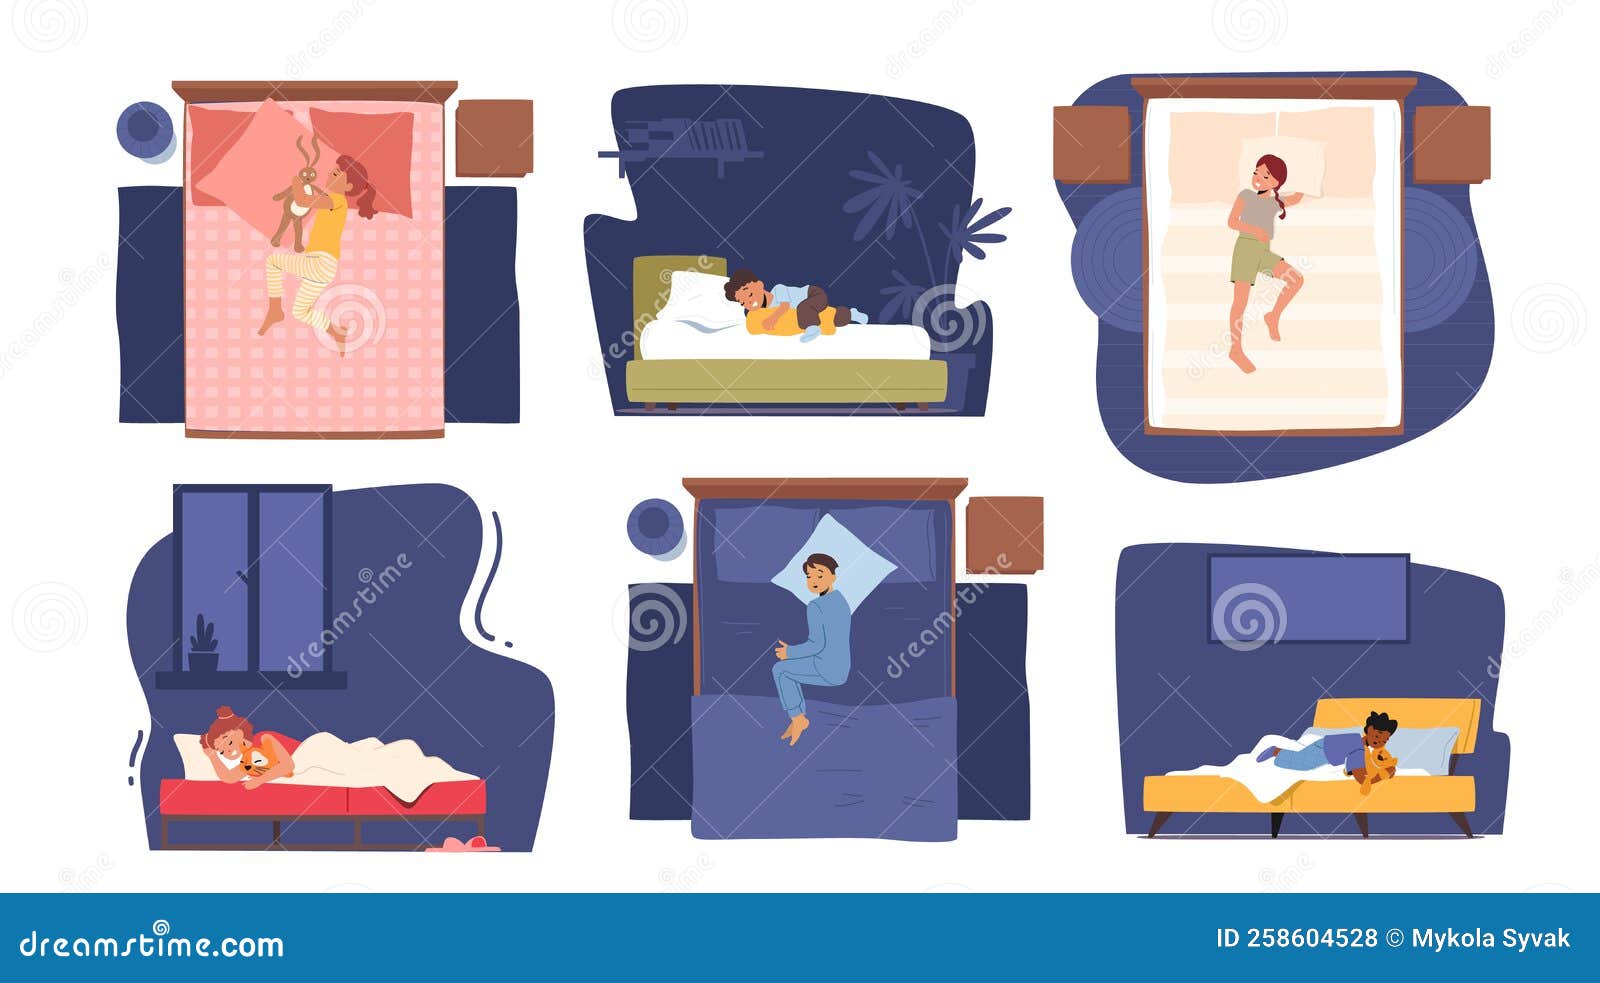 https://thumbs.dreamstime.com/z/set-kid-sleep-bed-top-side-view-relaxed-little-children-characters-lying-comfortable-sleeping-place-home-set-kid-258604528.jpg